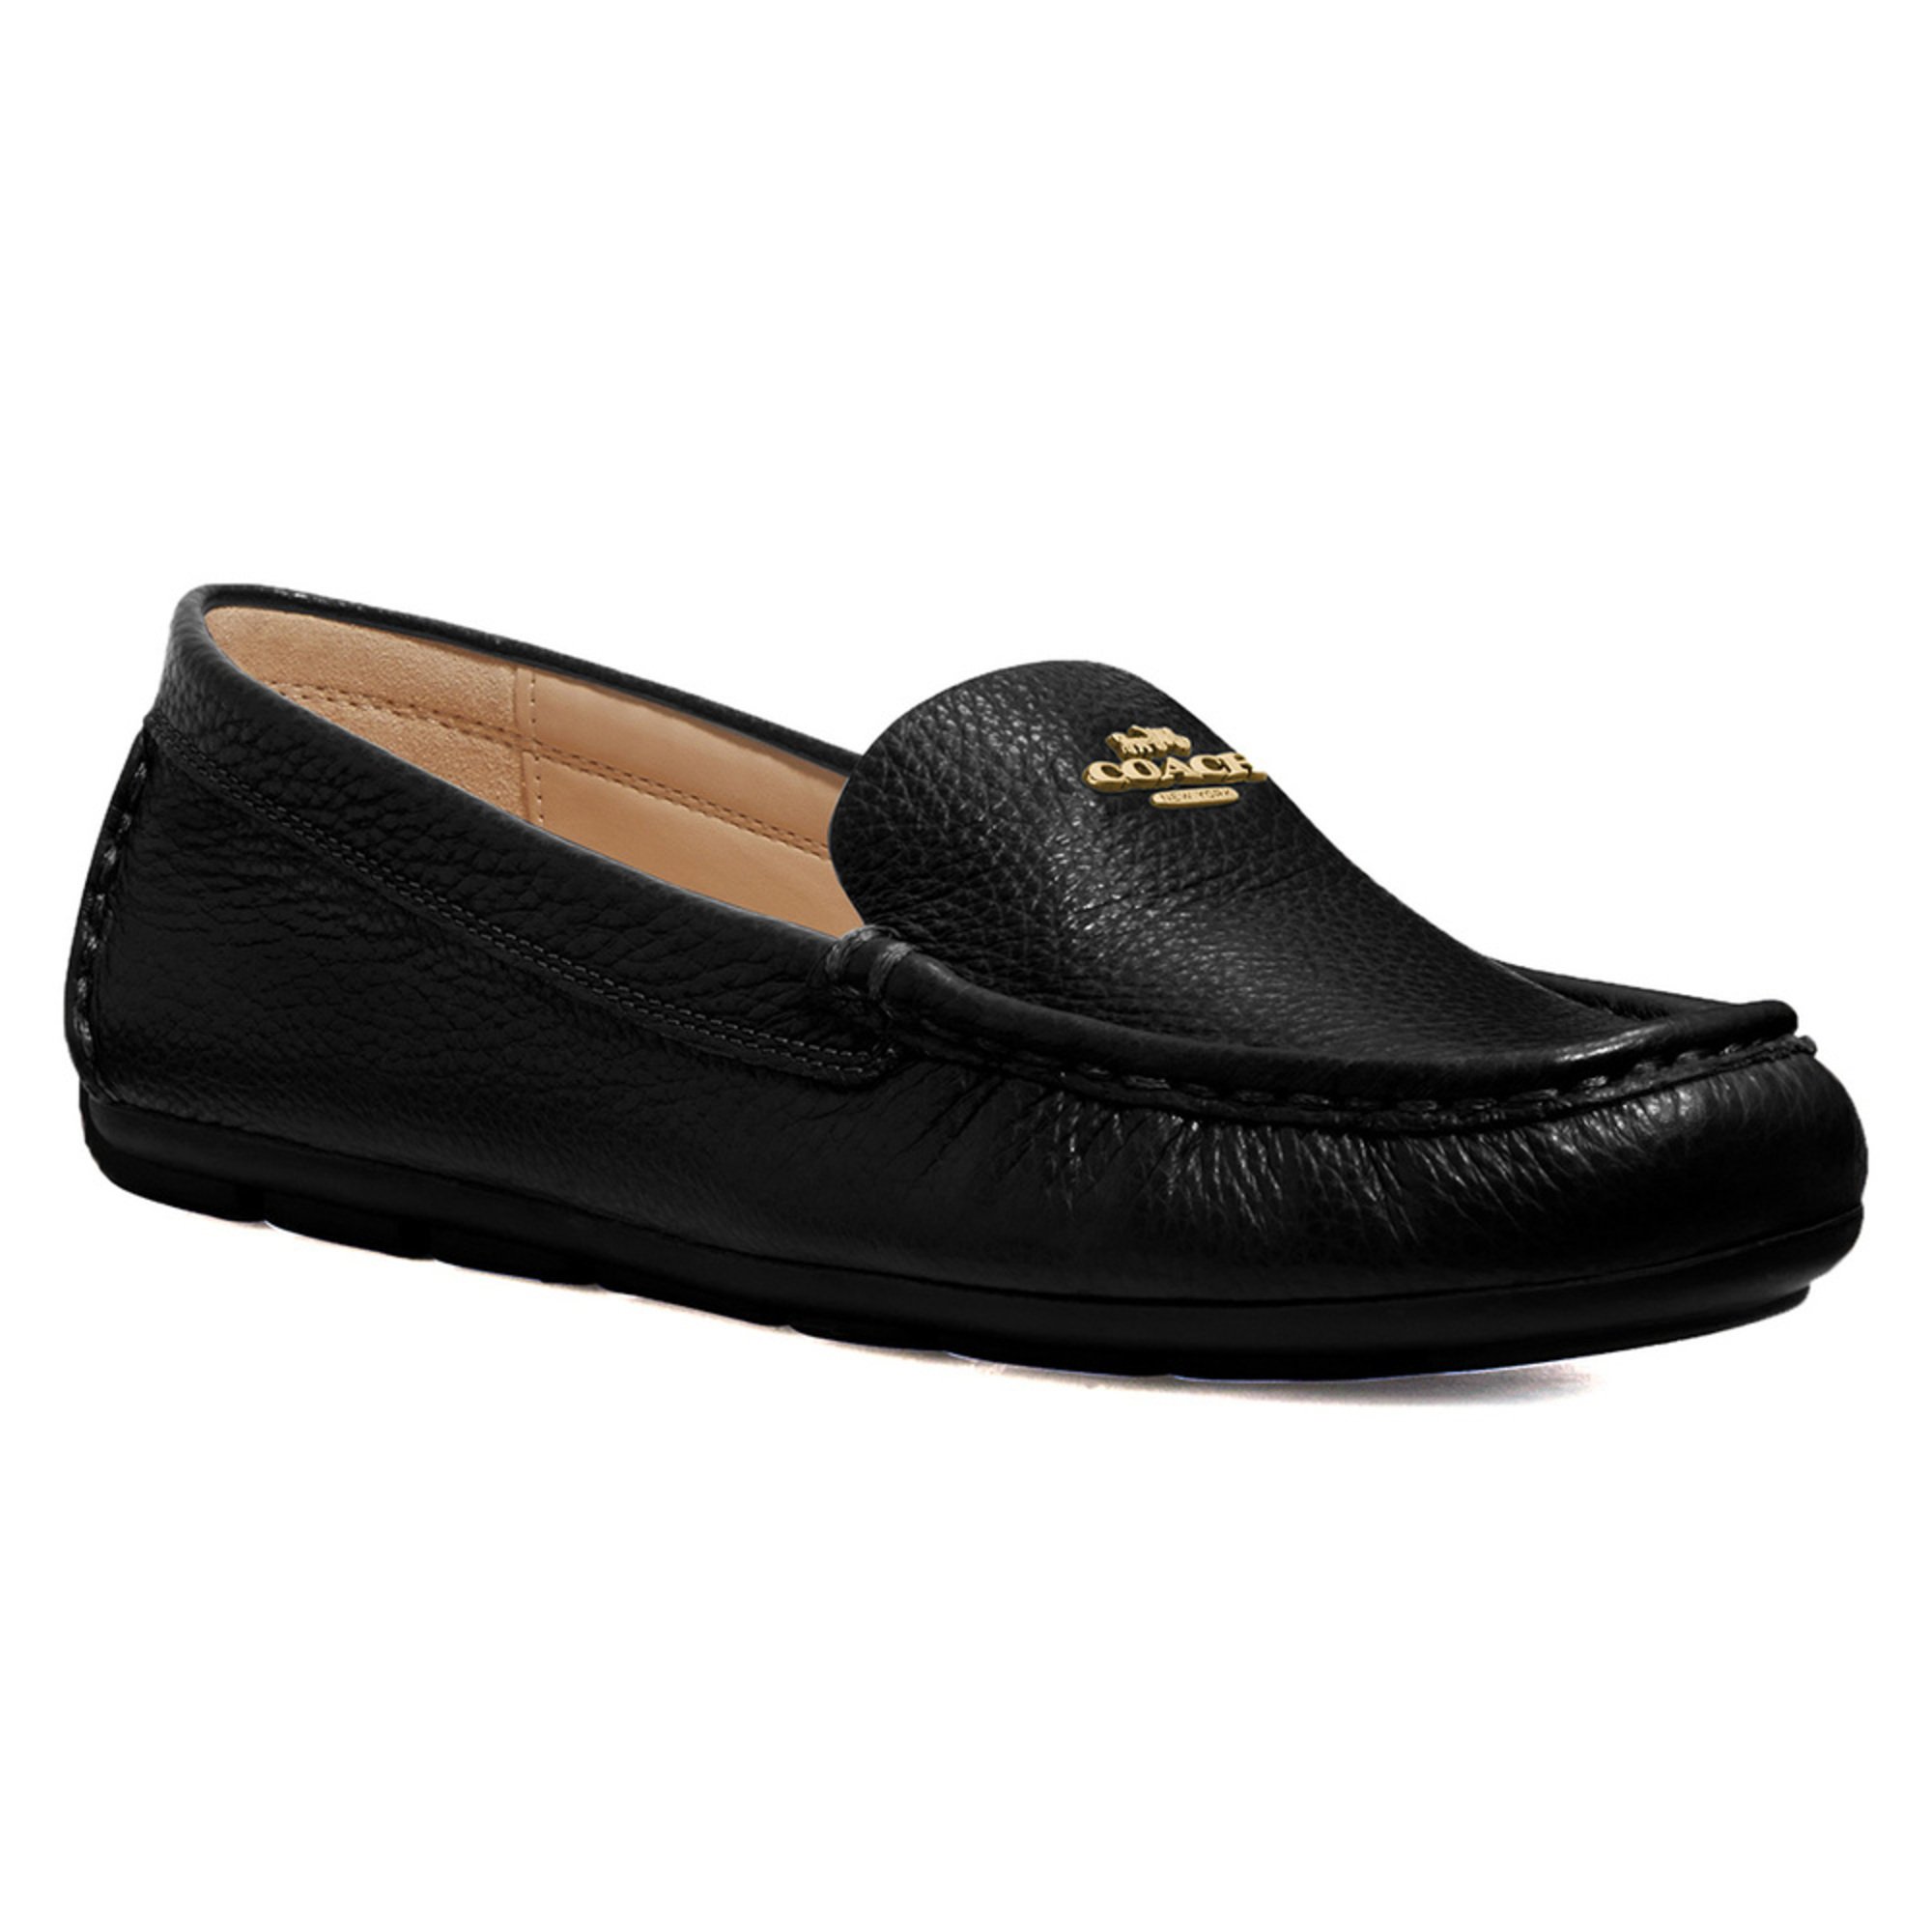 Coach Women's Marley Driver | Women's Loafer And Boat Shoes | Shoes ...